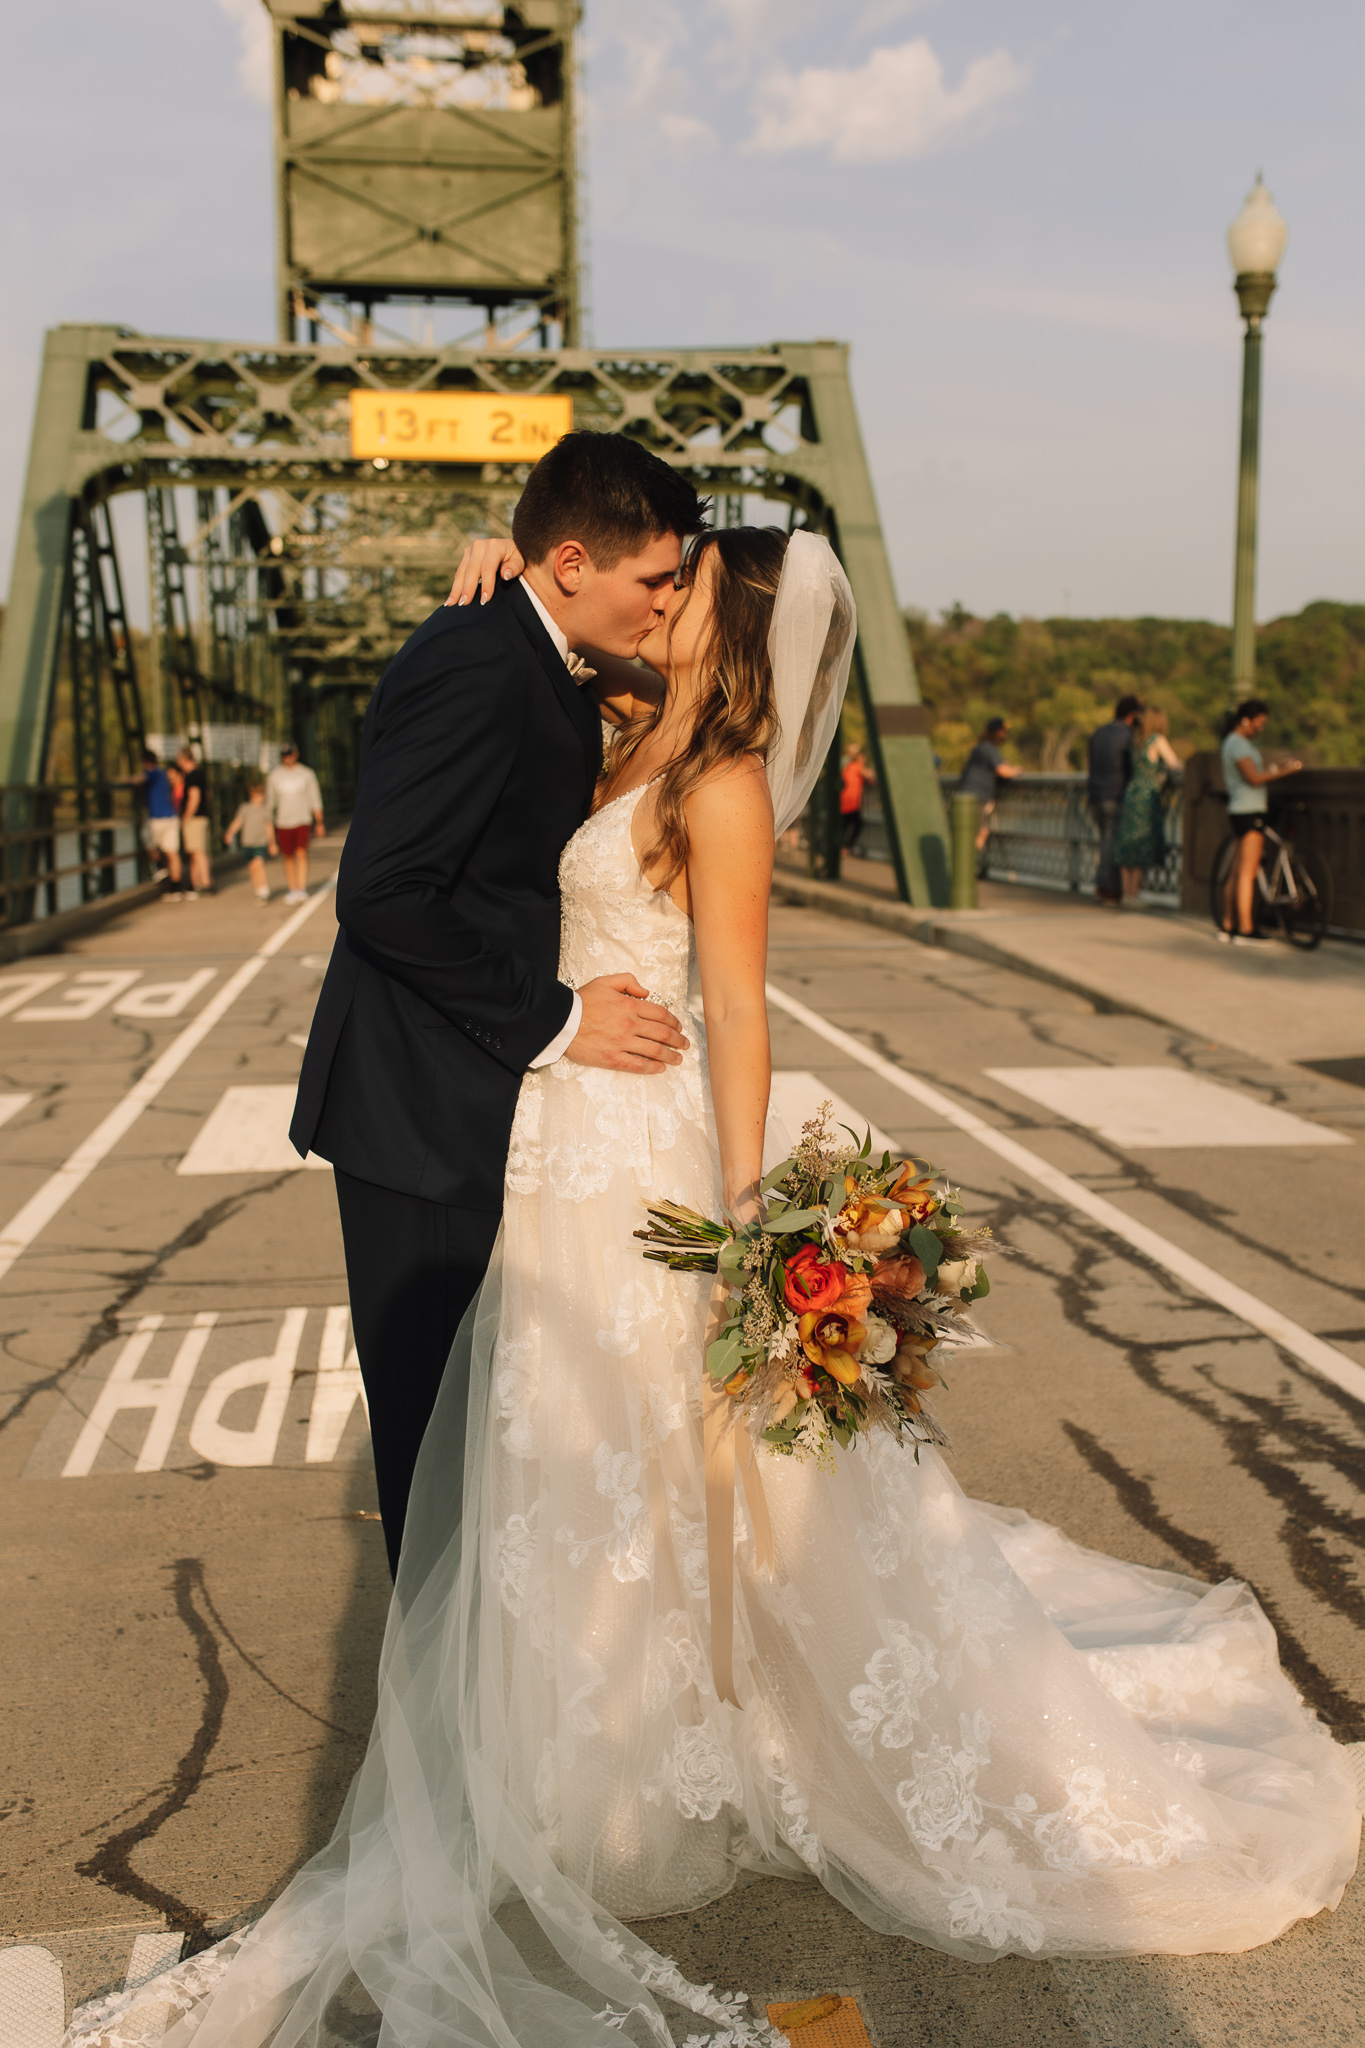 Bride and Groom Portraits on the Stillwater bridge overlooking the St. Croix River